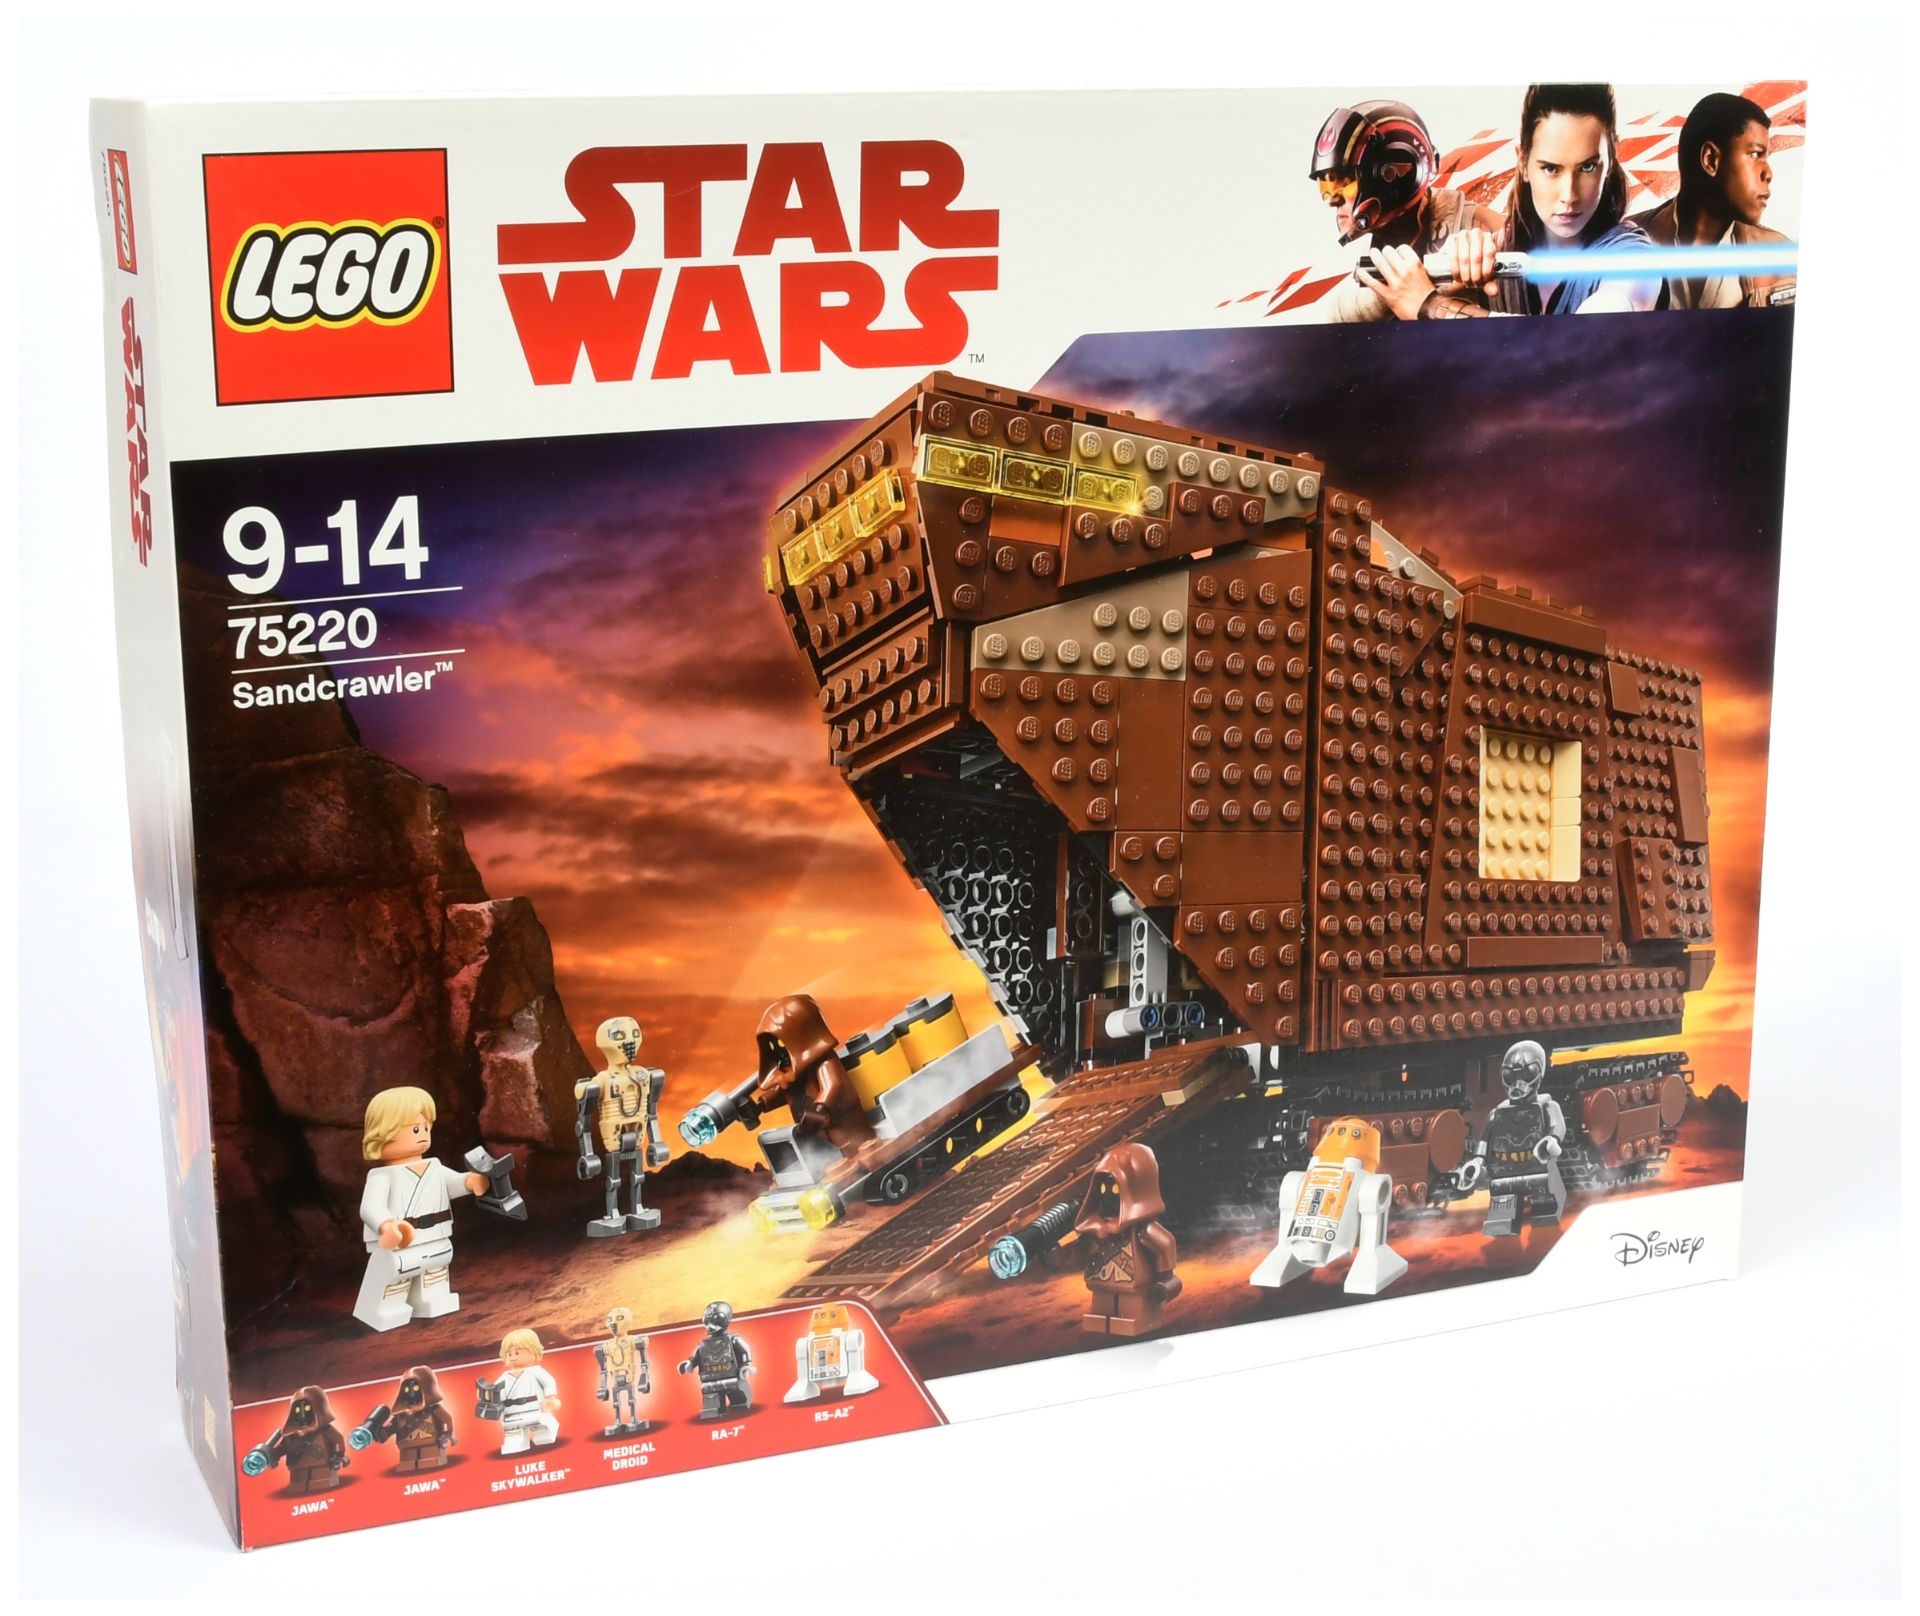 Lego Star Wars 75220 A New Hope - Sandcrawler, within Near Mint Sealed packaging.